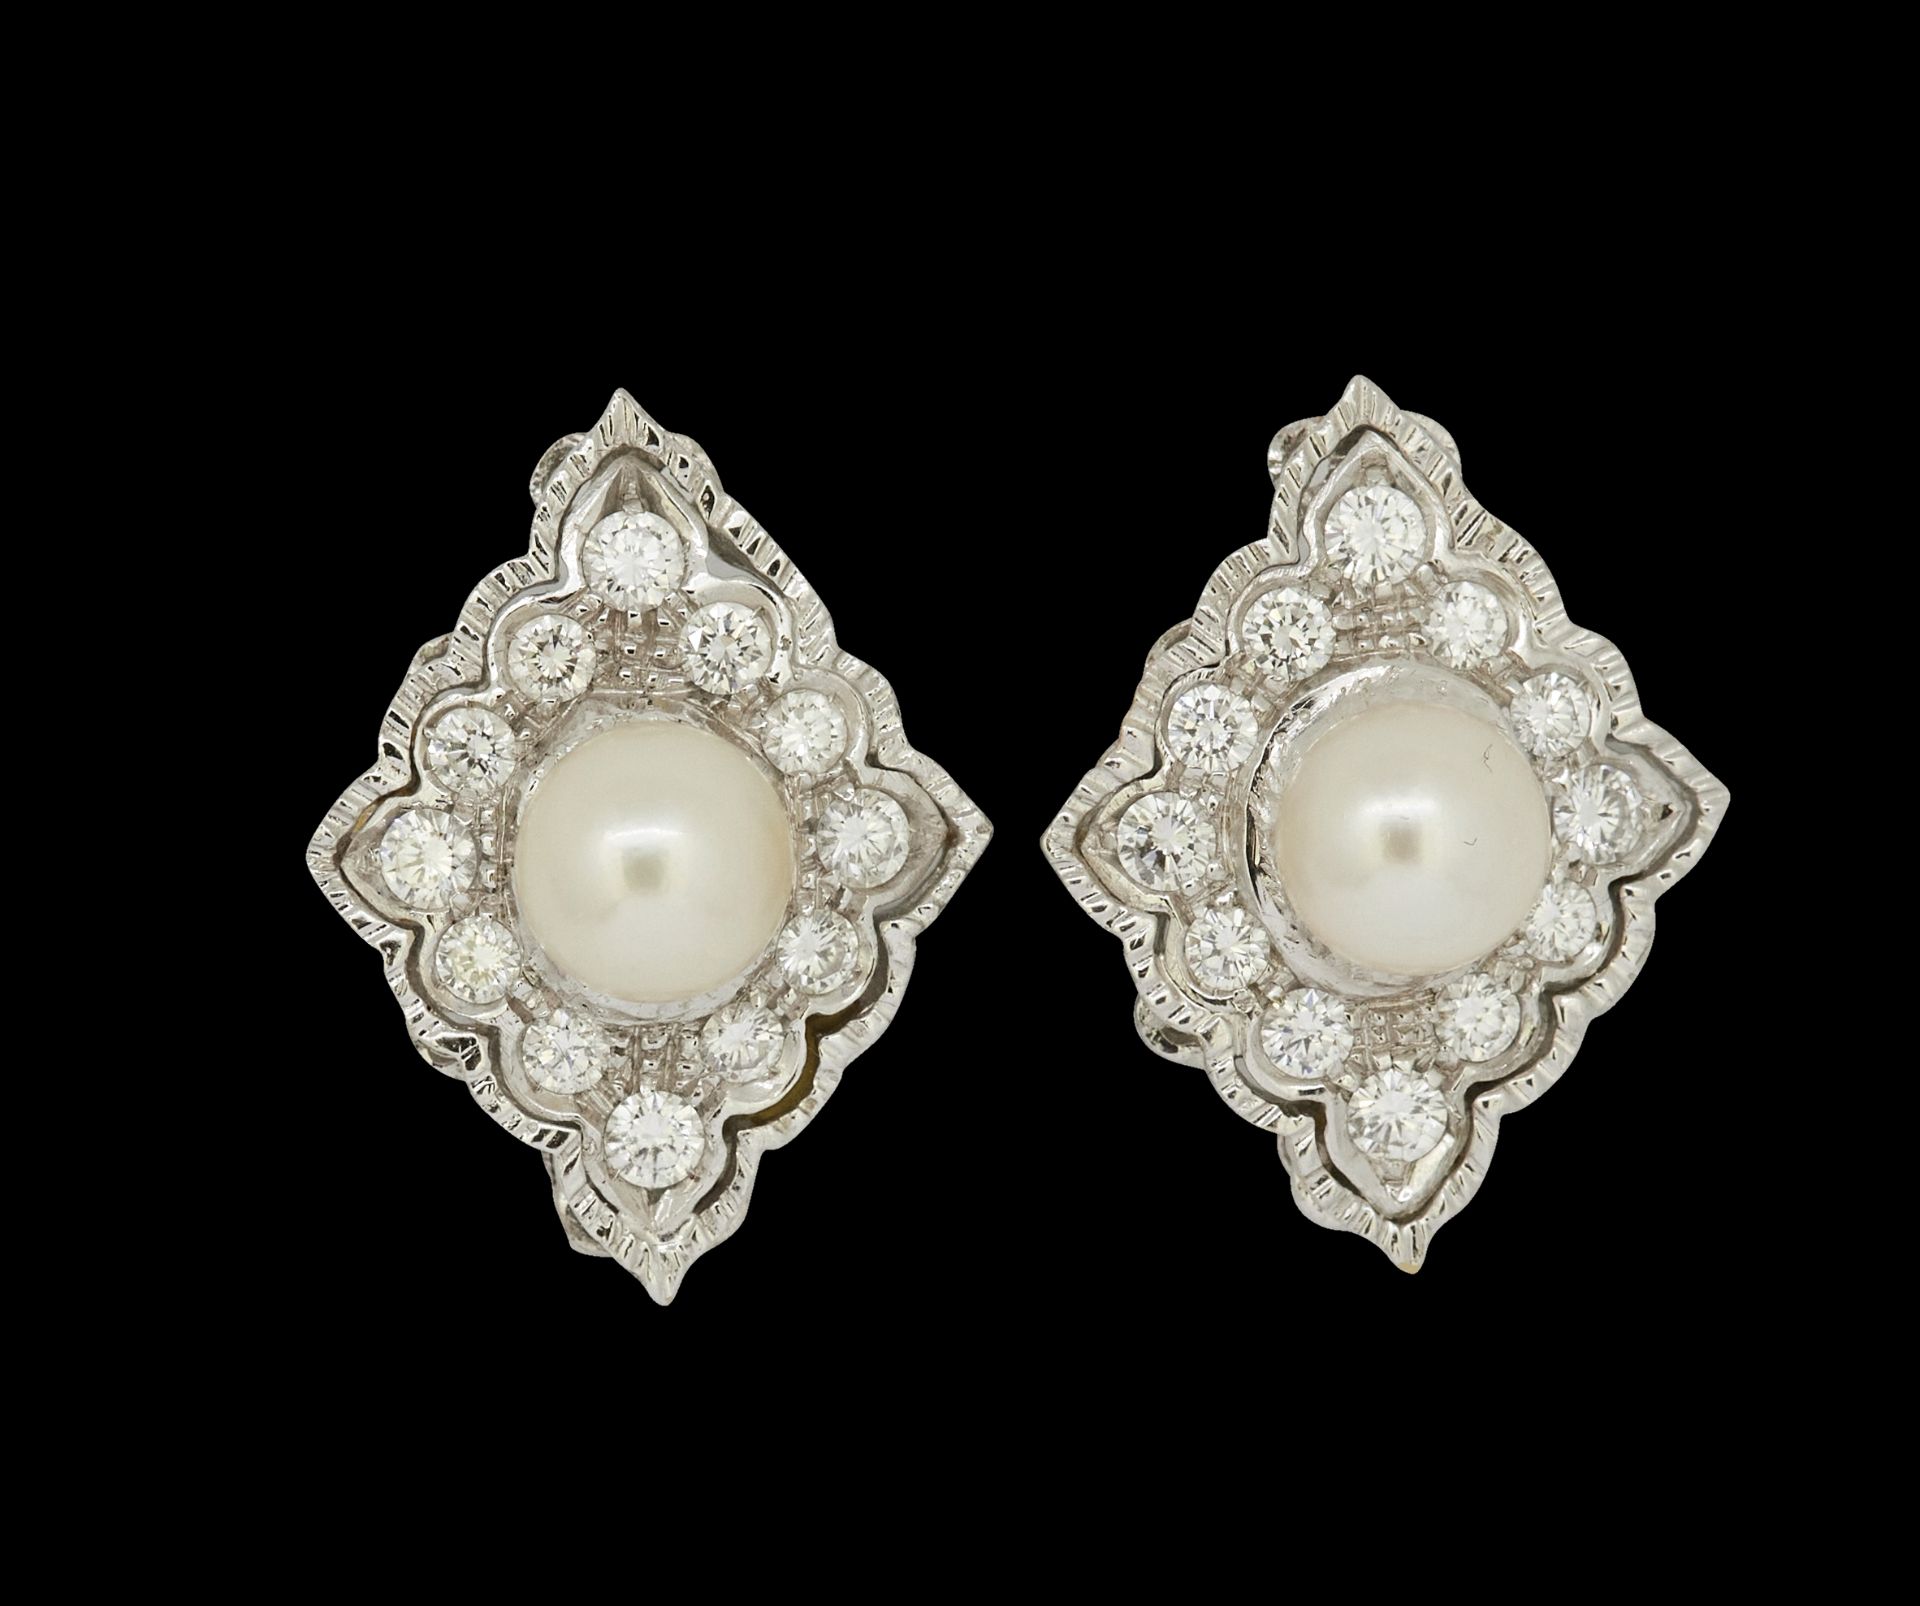 PAIR OF PEARL AND DAIMOND EARRINGS